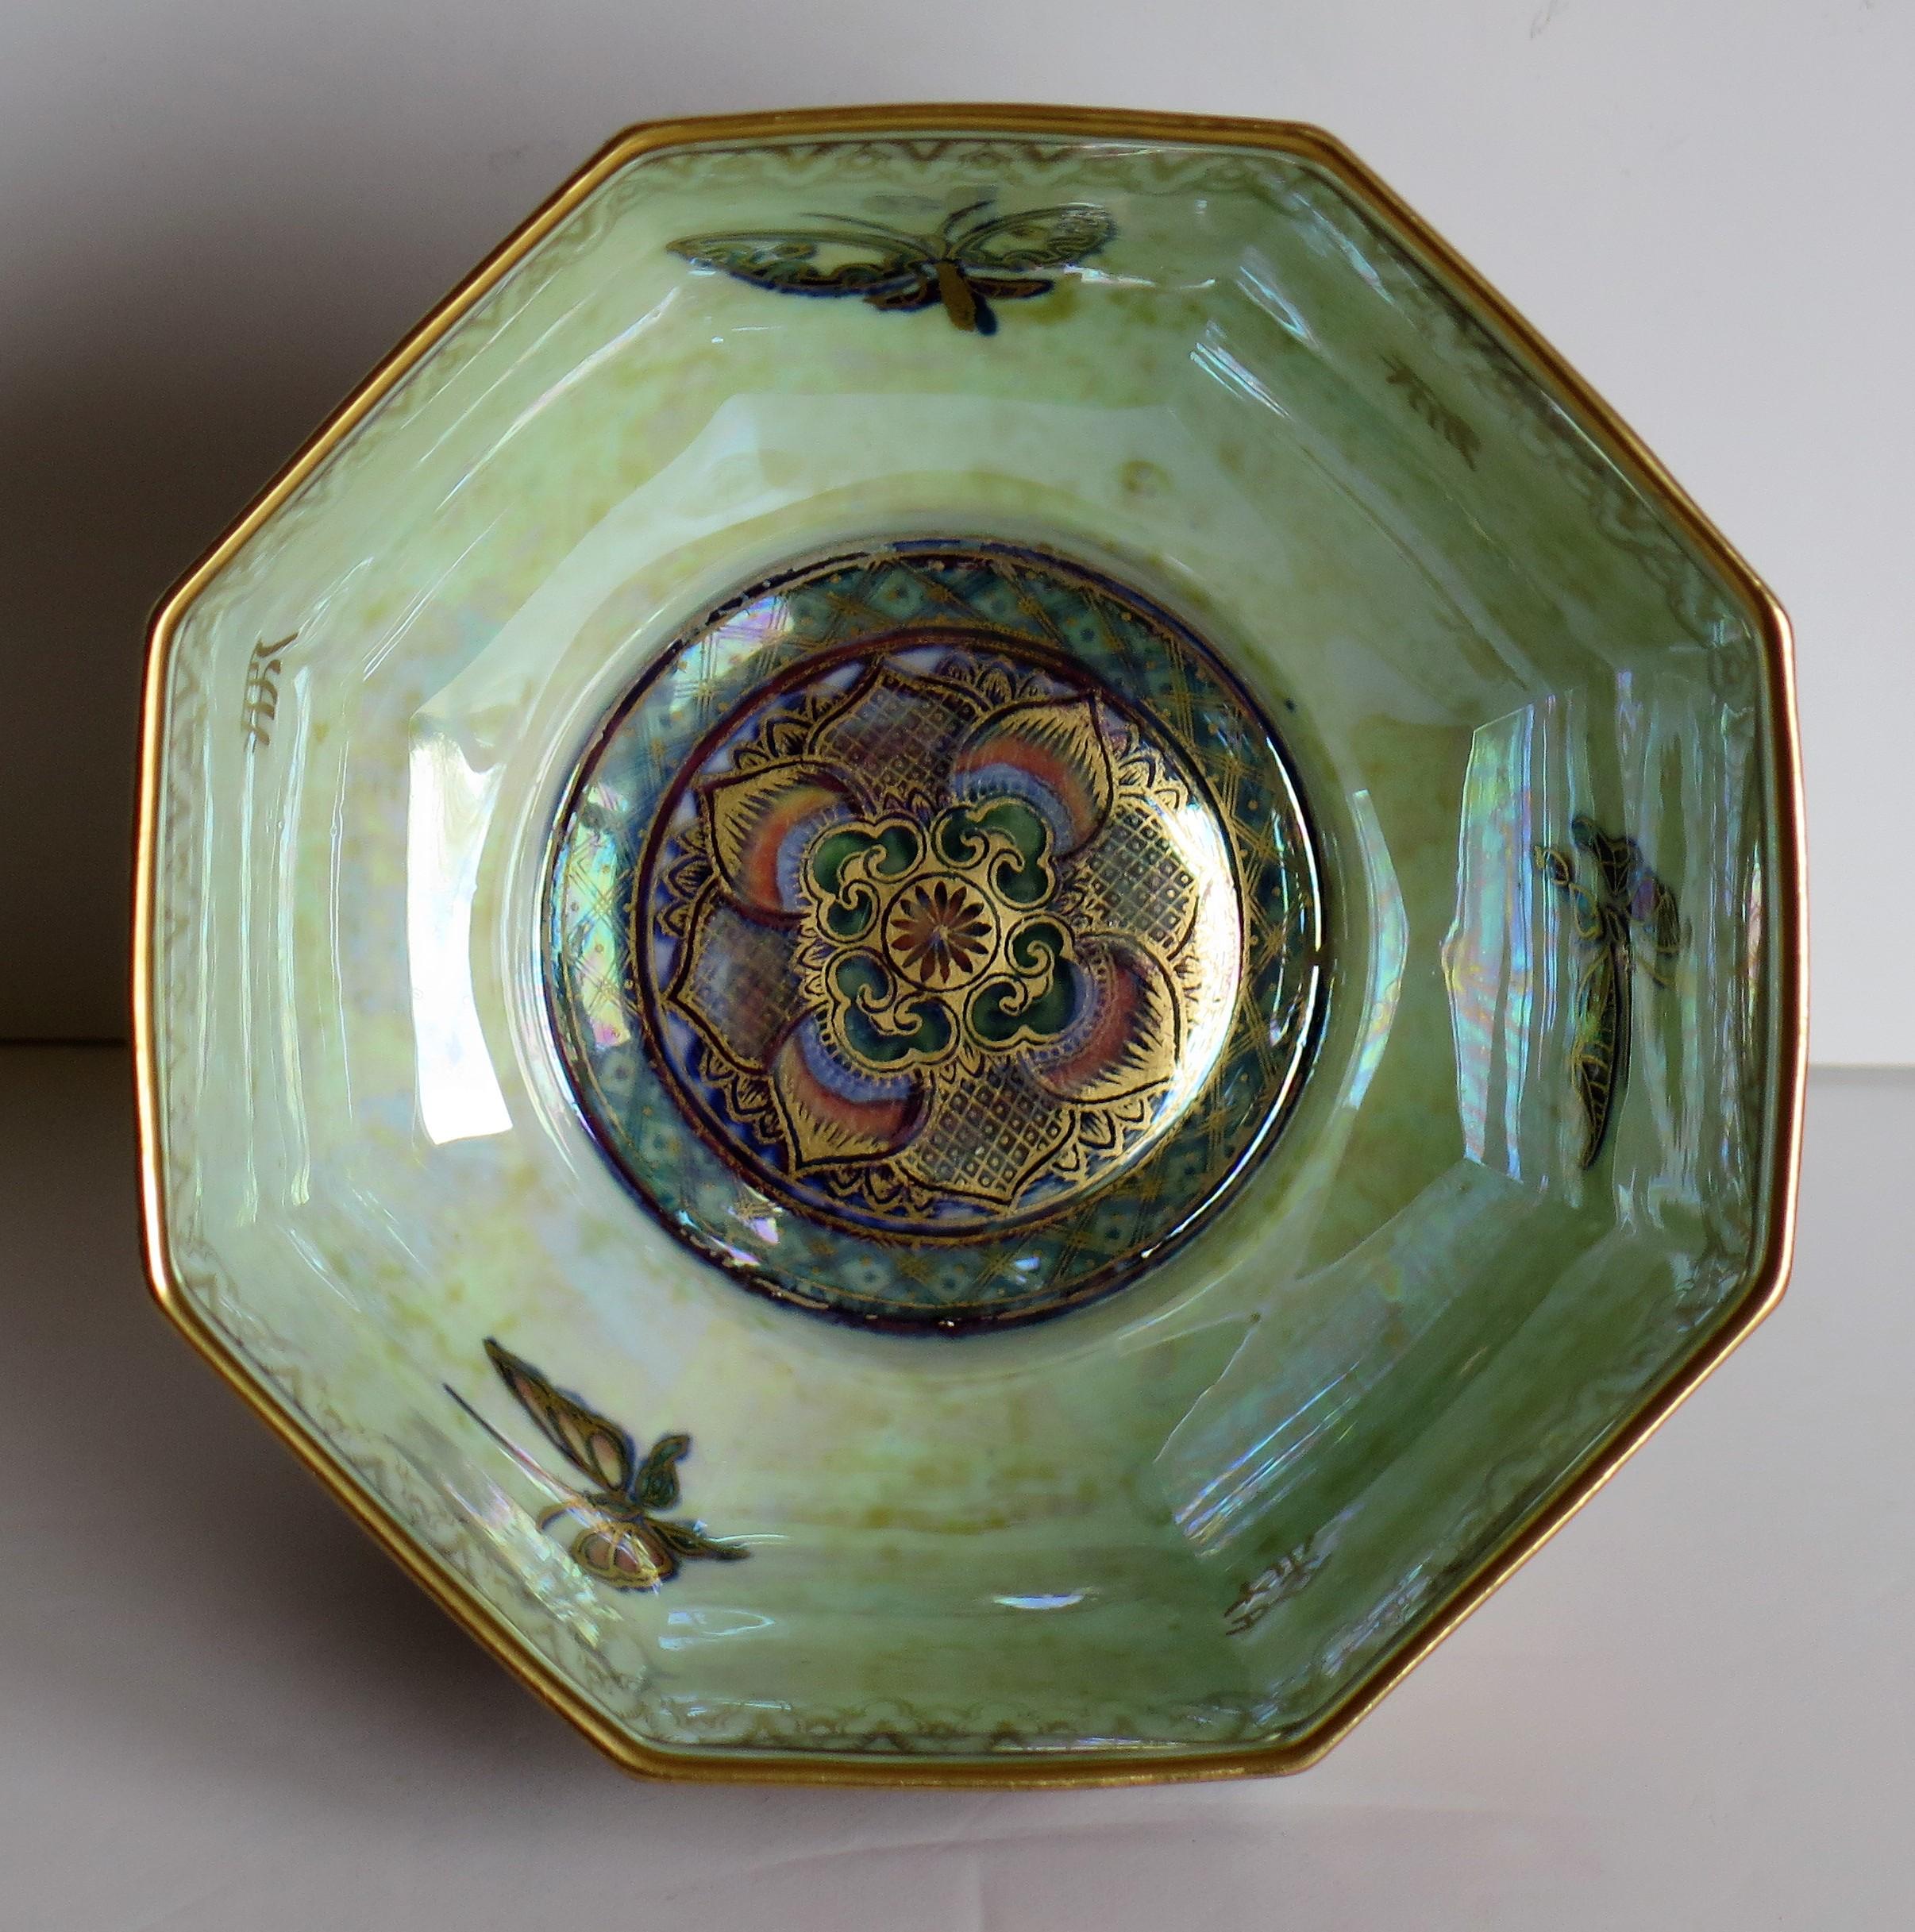 This is a high quality Art Deco period, porcelain octagonal Bowl from the Fairyland Lustre range, pattern Z4827, designed by Daisy Makeig-Jones and made by the Wedgwood factory, England, circa 1925.

This beautiful bowl has a mottled opalescent